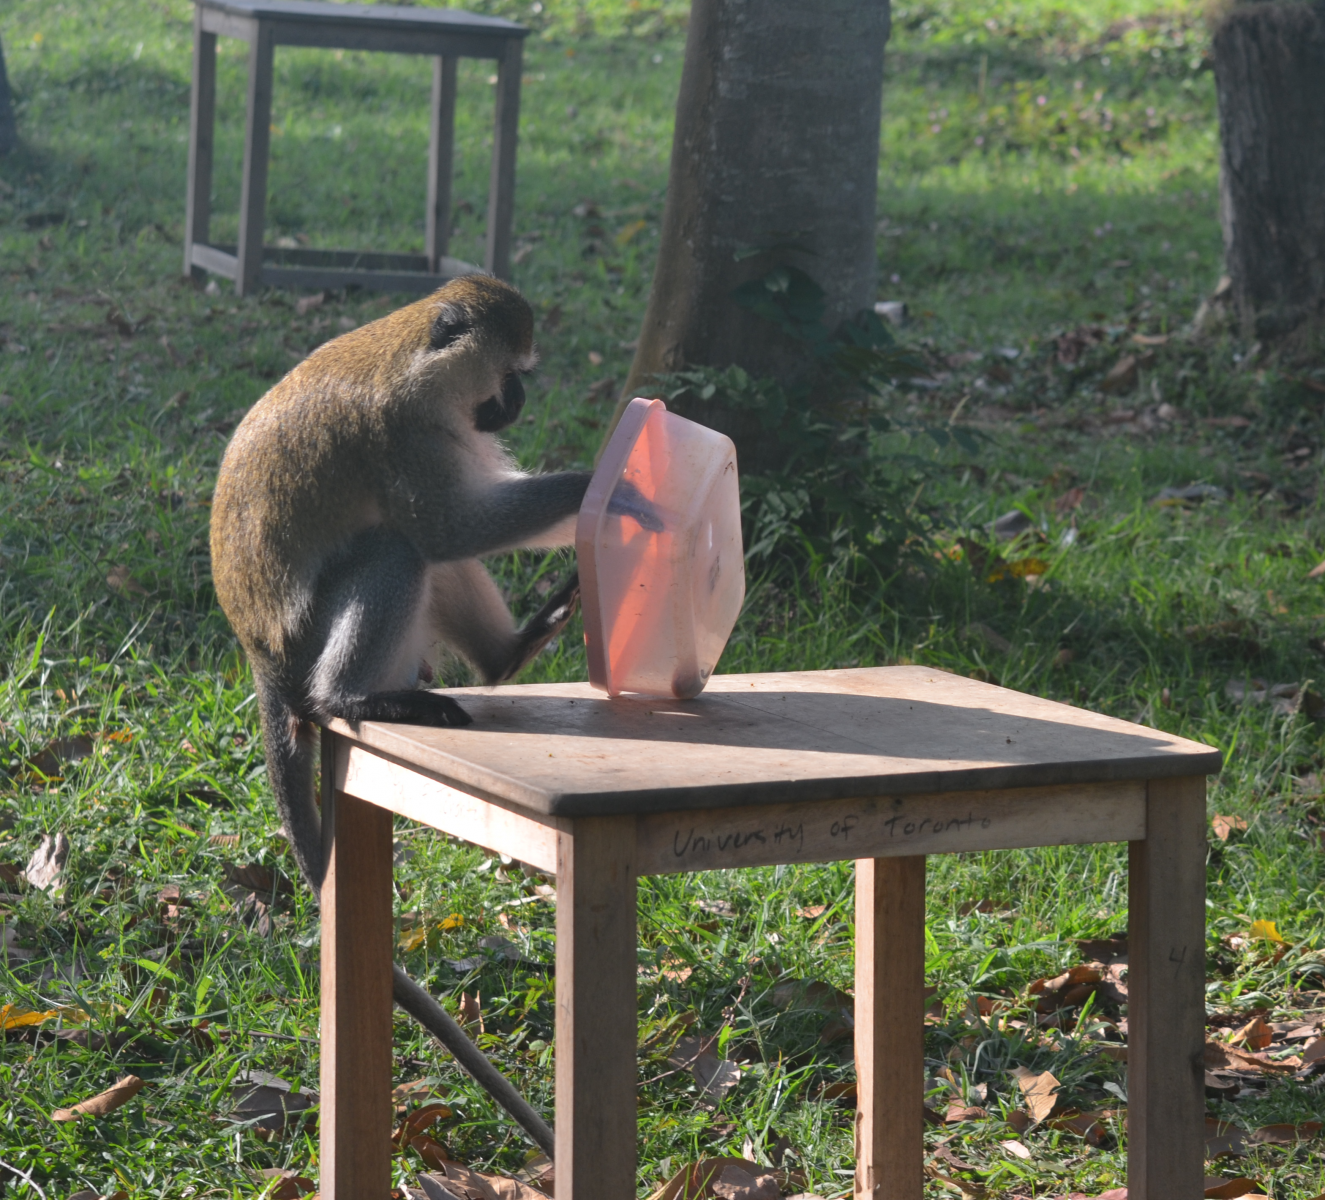 Monkey playing with plastic container and standing on top of a wooden table in an outdoor setting